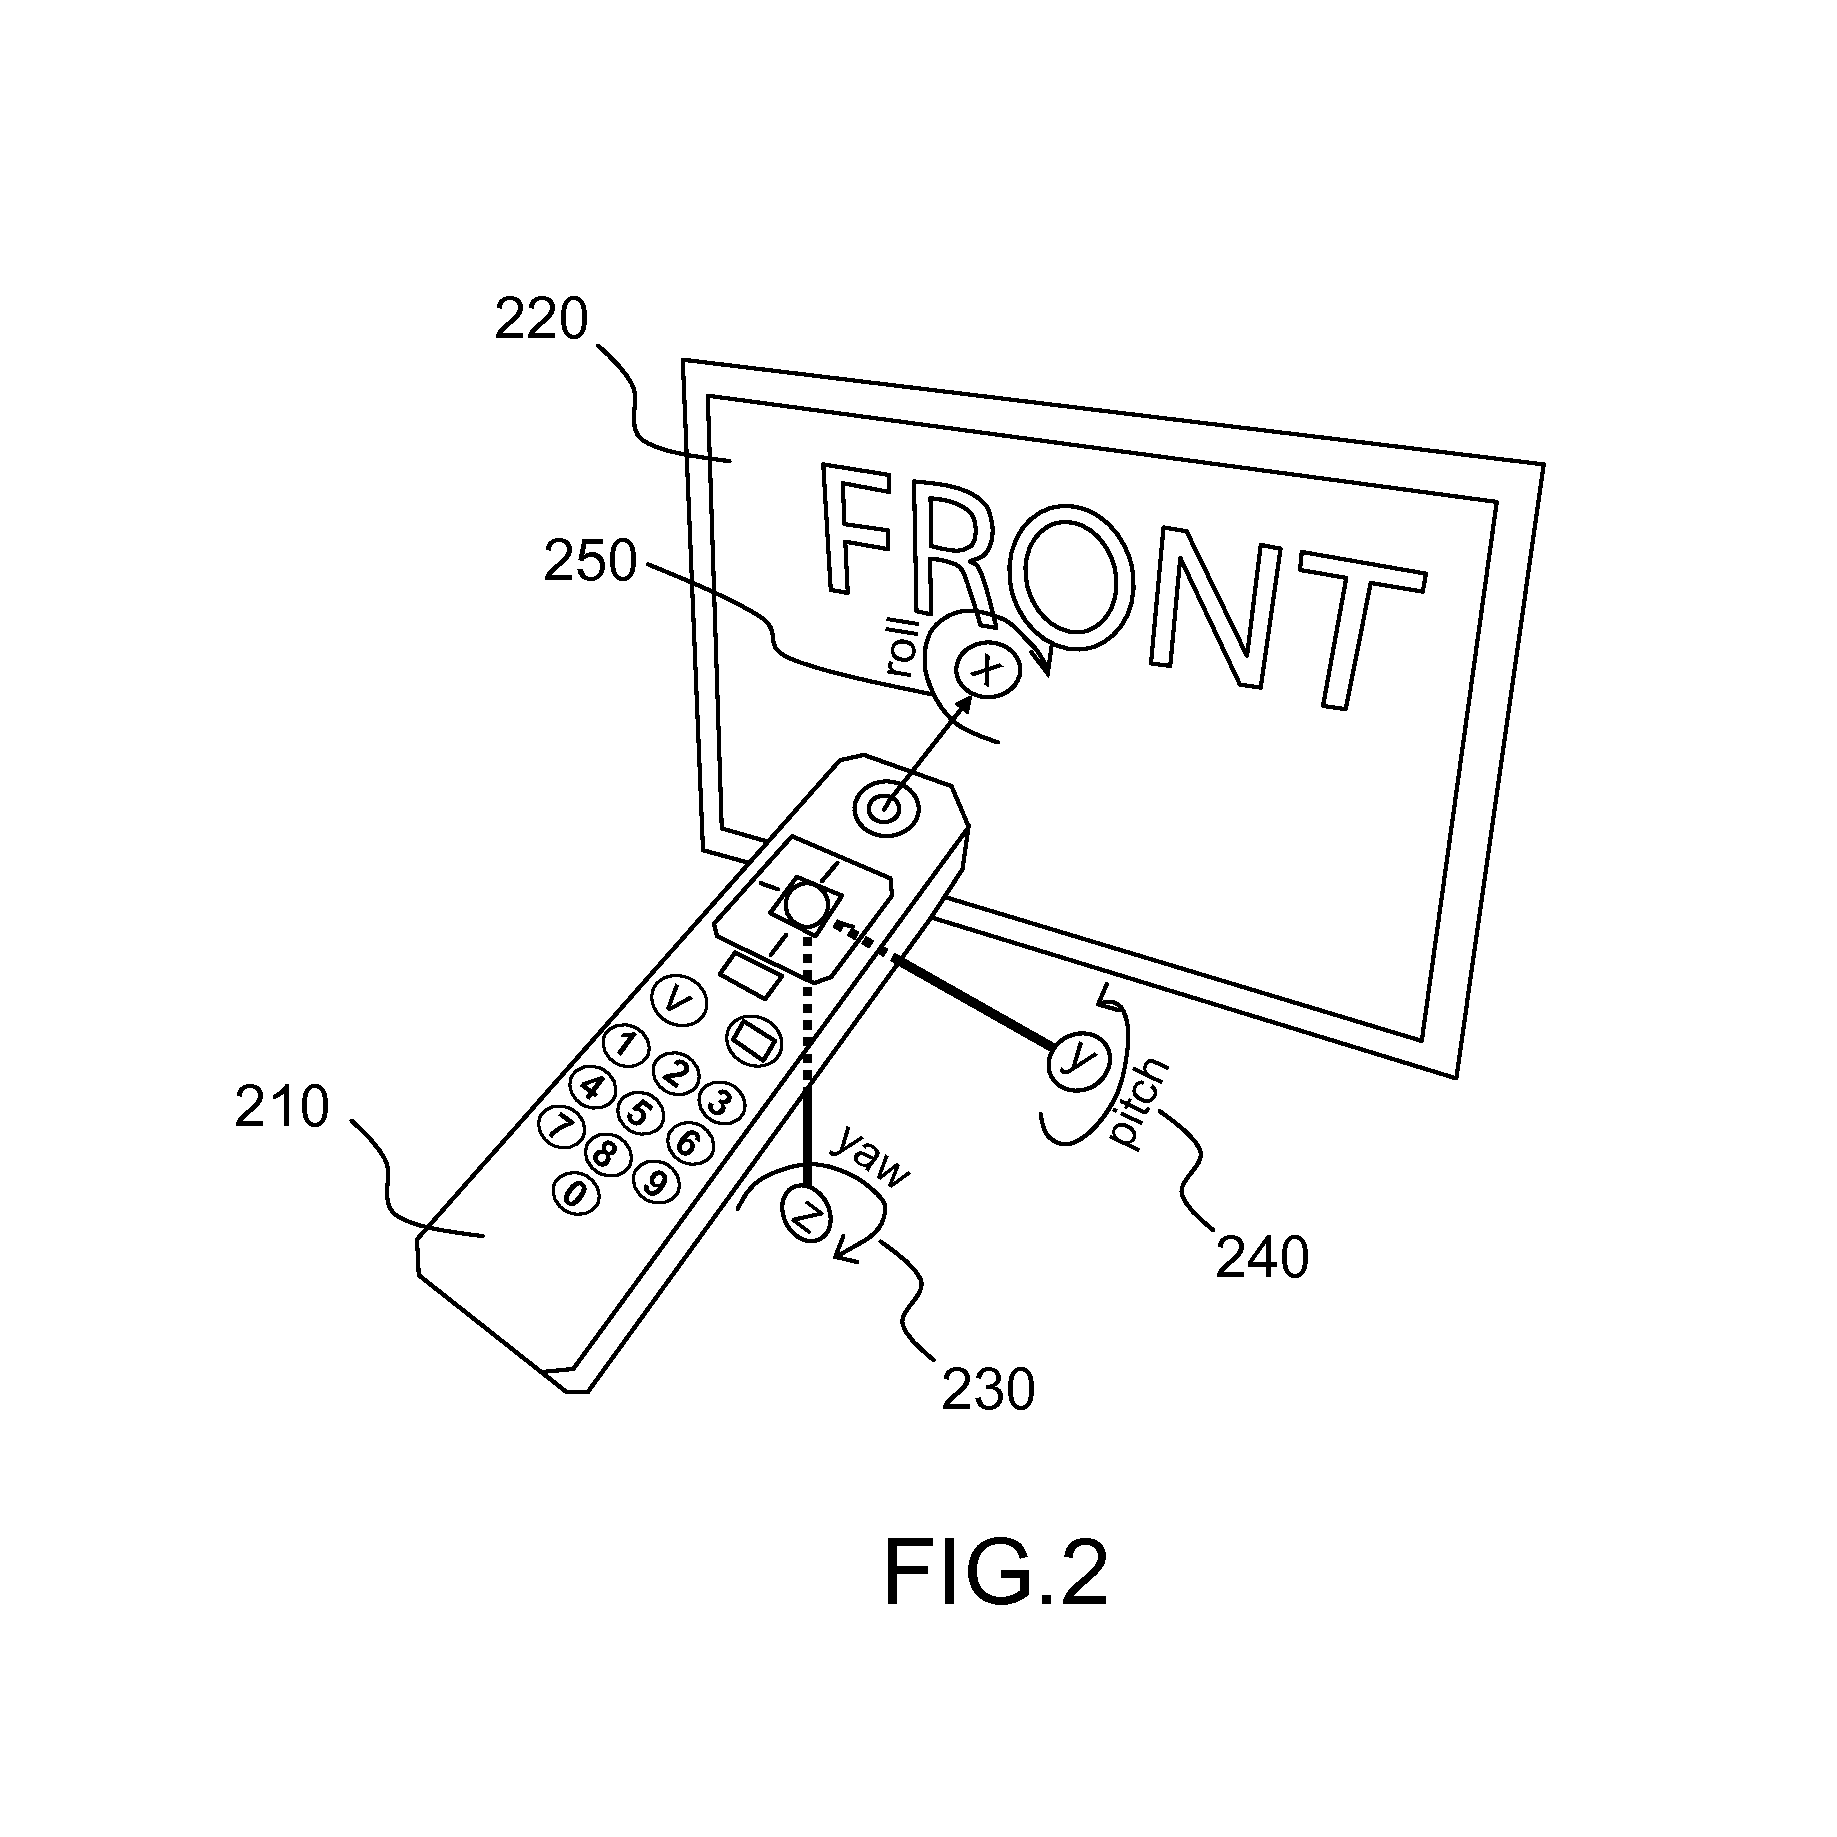 Command of a device by gesture emulation of touch gestures